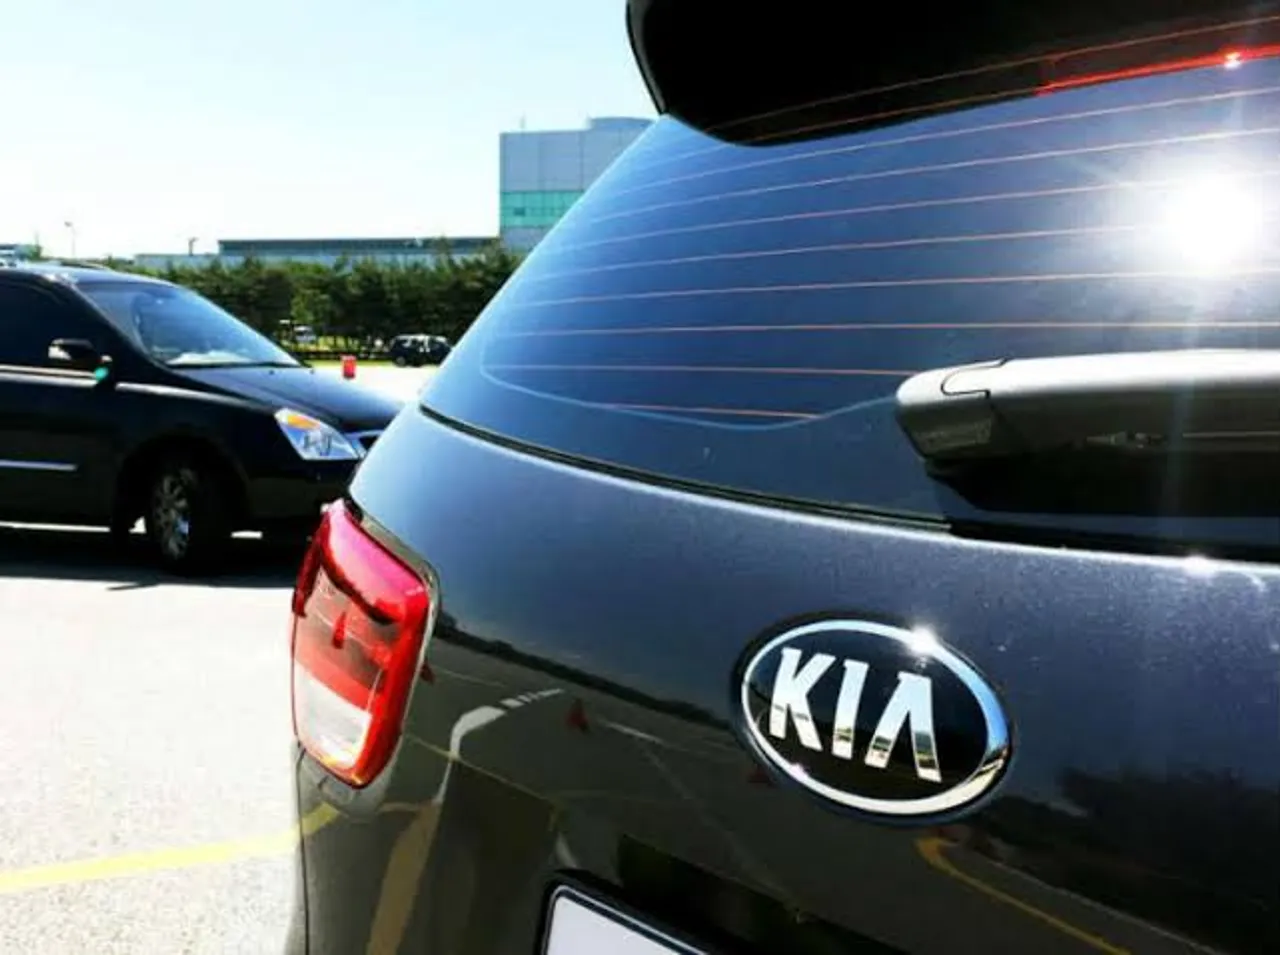 South Korean Auto Giant Kia to Start Production from Andhra Pradesh Manufacturing from July 2019